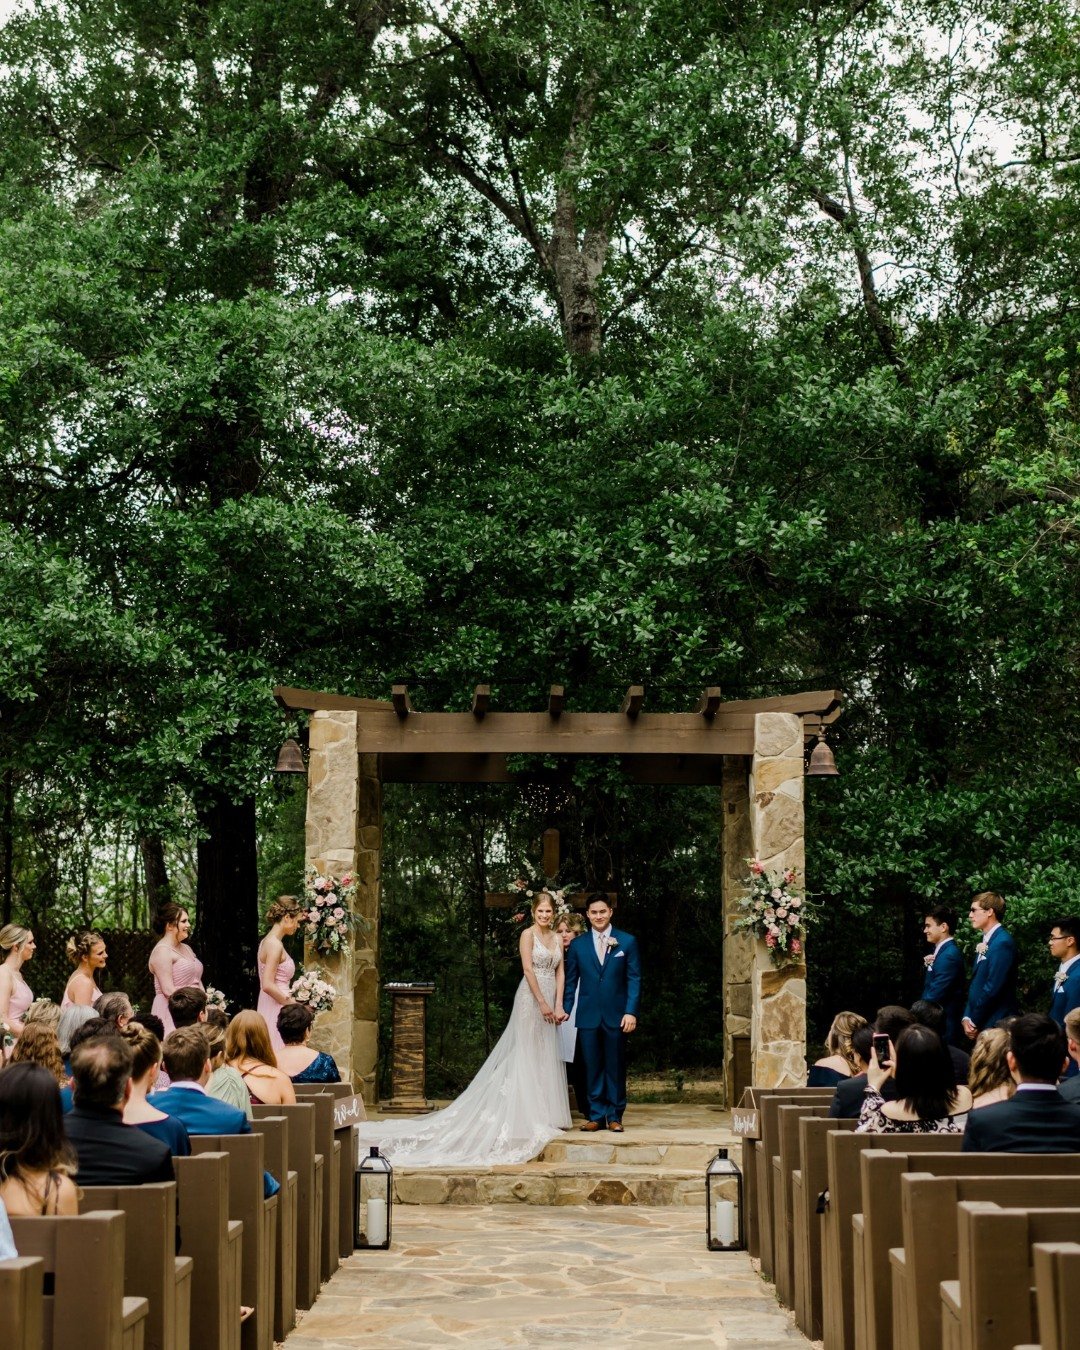 The joyous moments of becoming Mr. and Mrs. in front of your family and friends 🥰

📷 @racheldriskellphoto 
💐 @heb_magnolia_blooms 
👰🤵 @katelyn.yin &amp; @brandon.yin.1 
💄 @blushdbeautytx 
Magnolia Bells Gold Package

More vendors from this stun